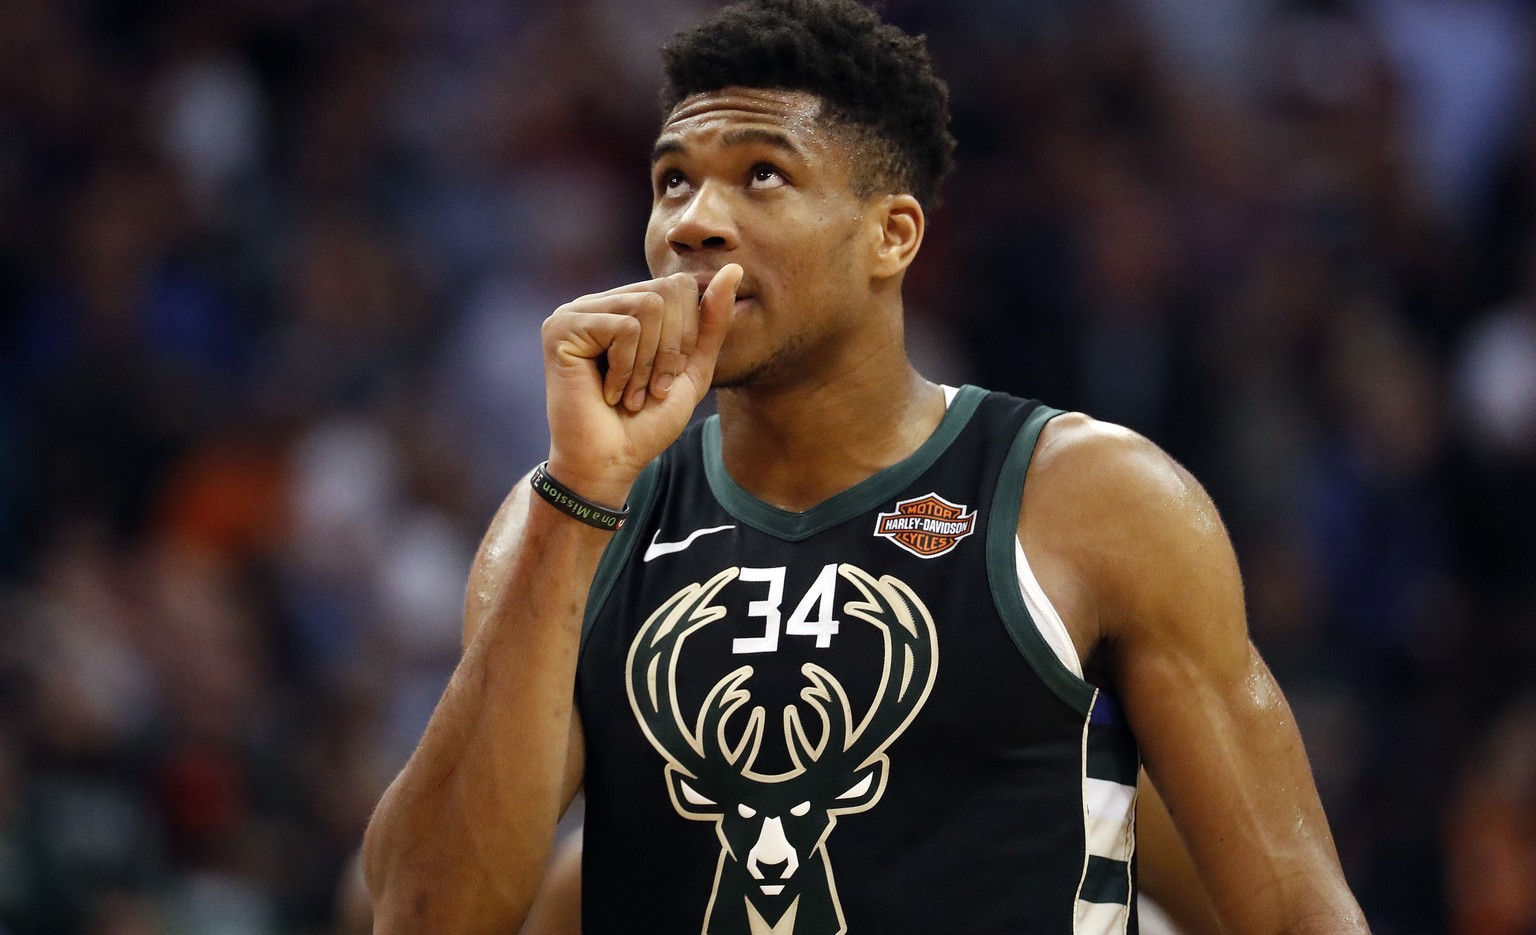 Milwaukee Bucks forward Giannis Antetokounmpo (34) looks at the scoreboard during the second half of an NBA basketball game against the Phoenix Suns, Monday, March 4, 2019, in Phoenix. (AP Photo/Matt  ...